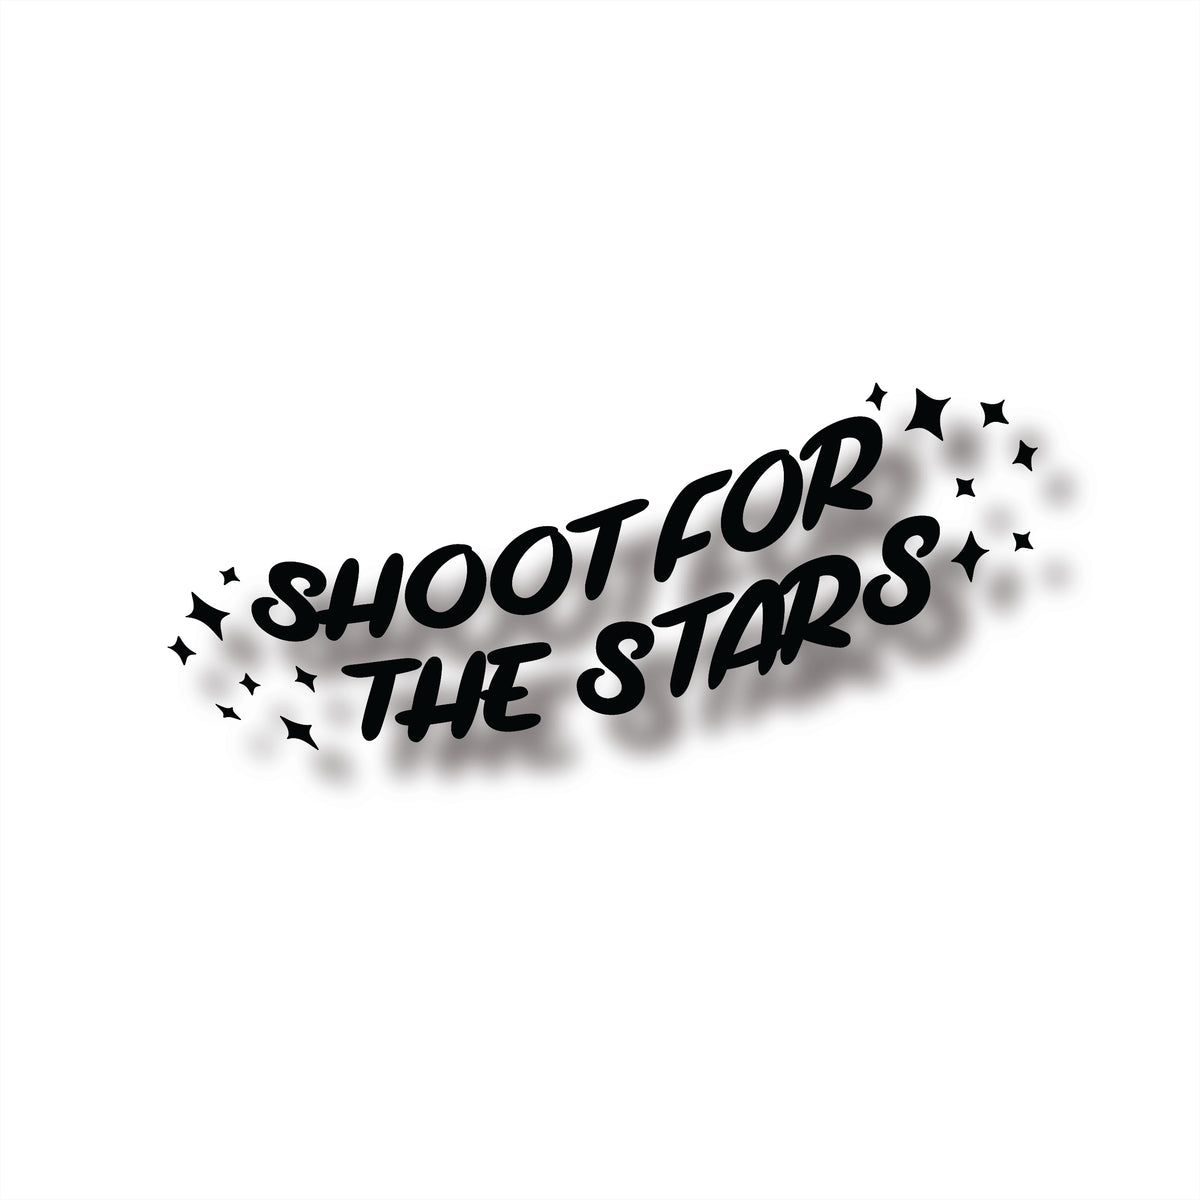 Shoot for the Stars Window Banner + Sticker Pack - Universal Fit